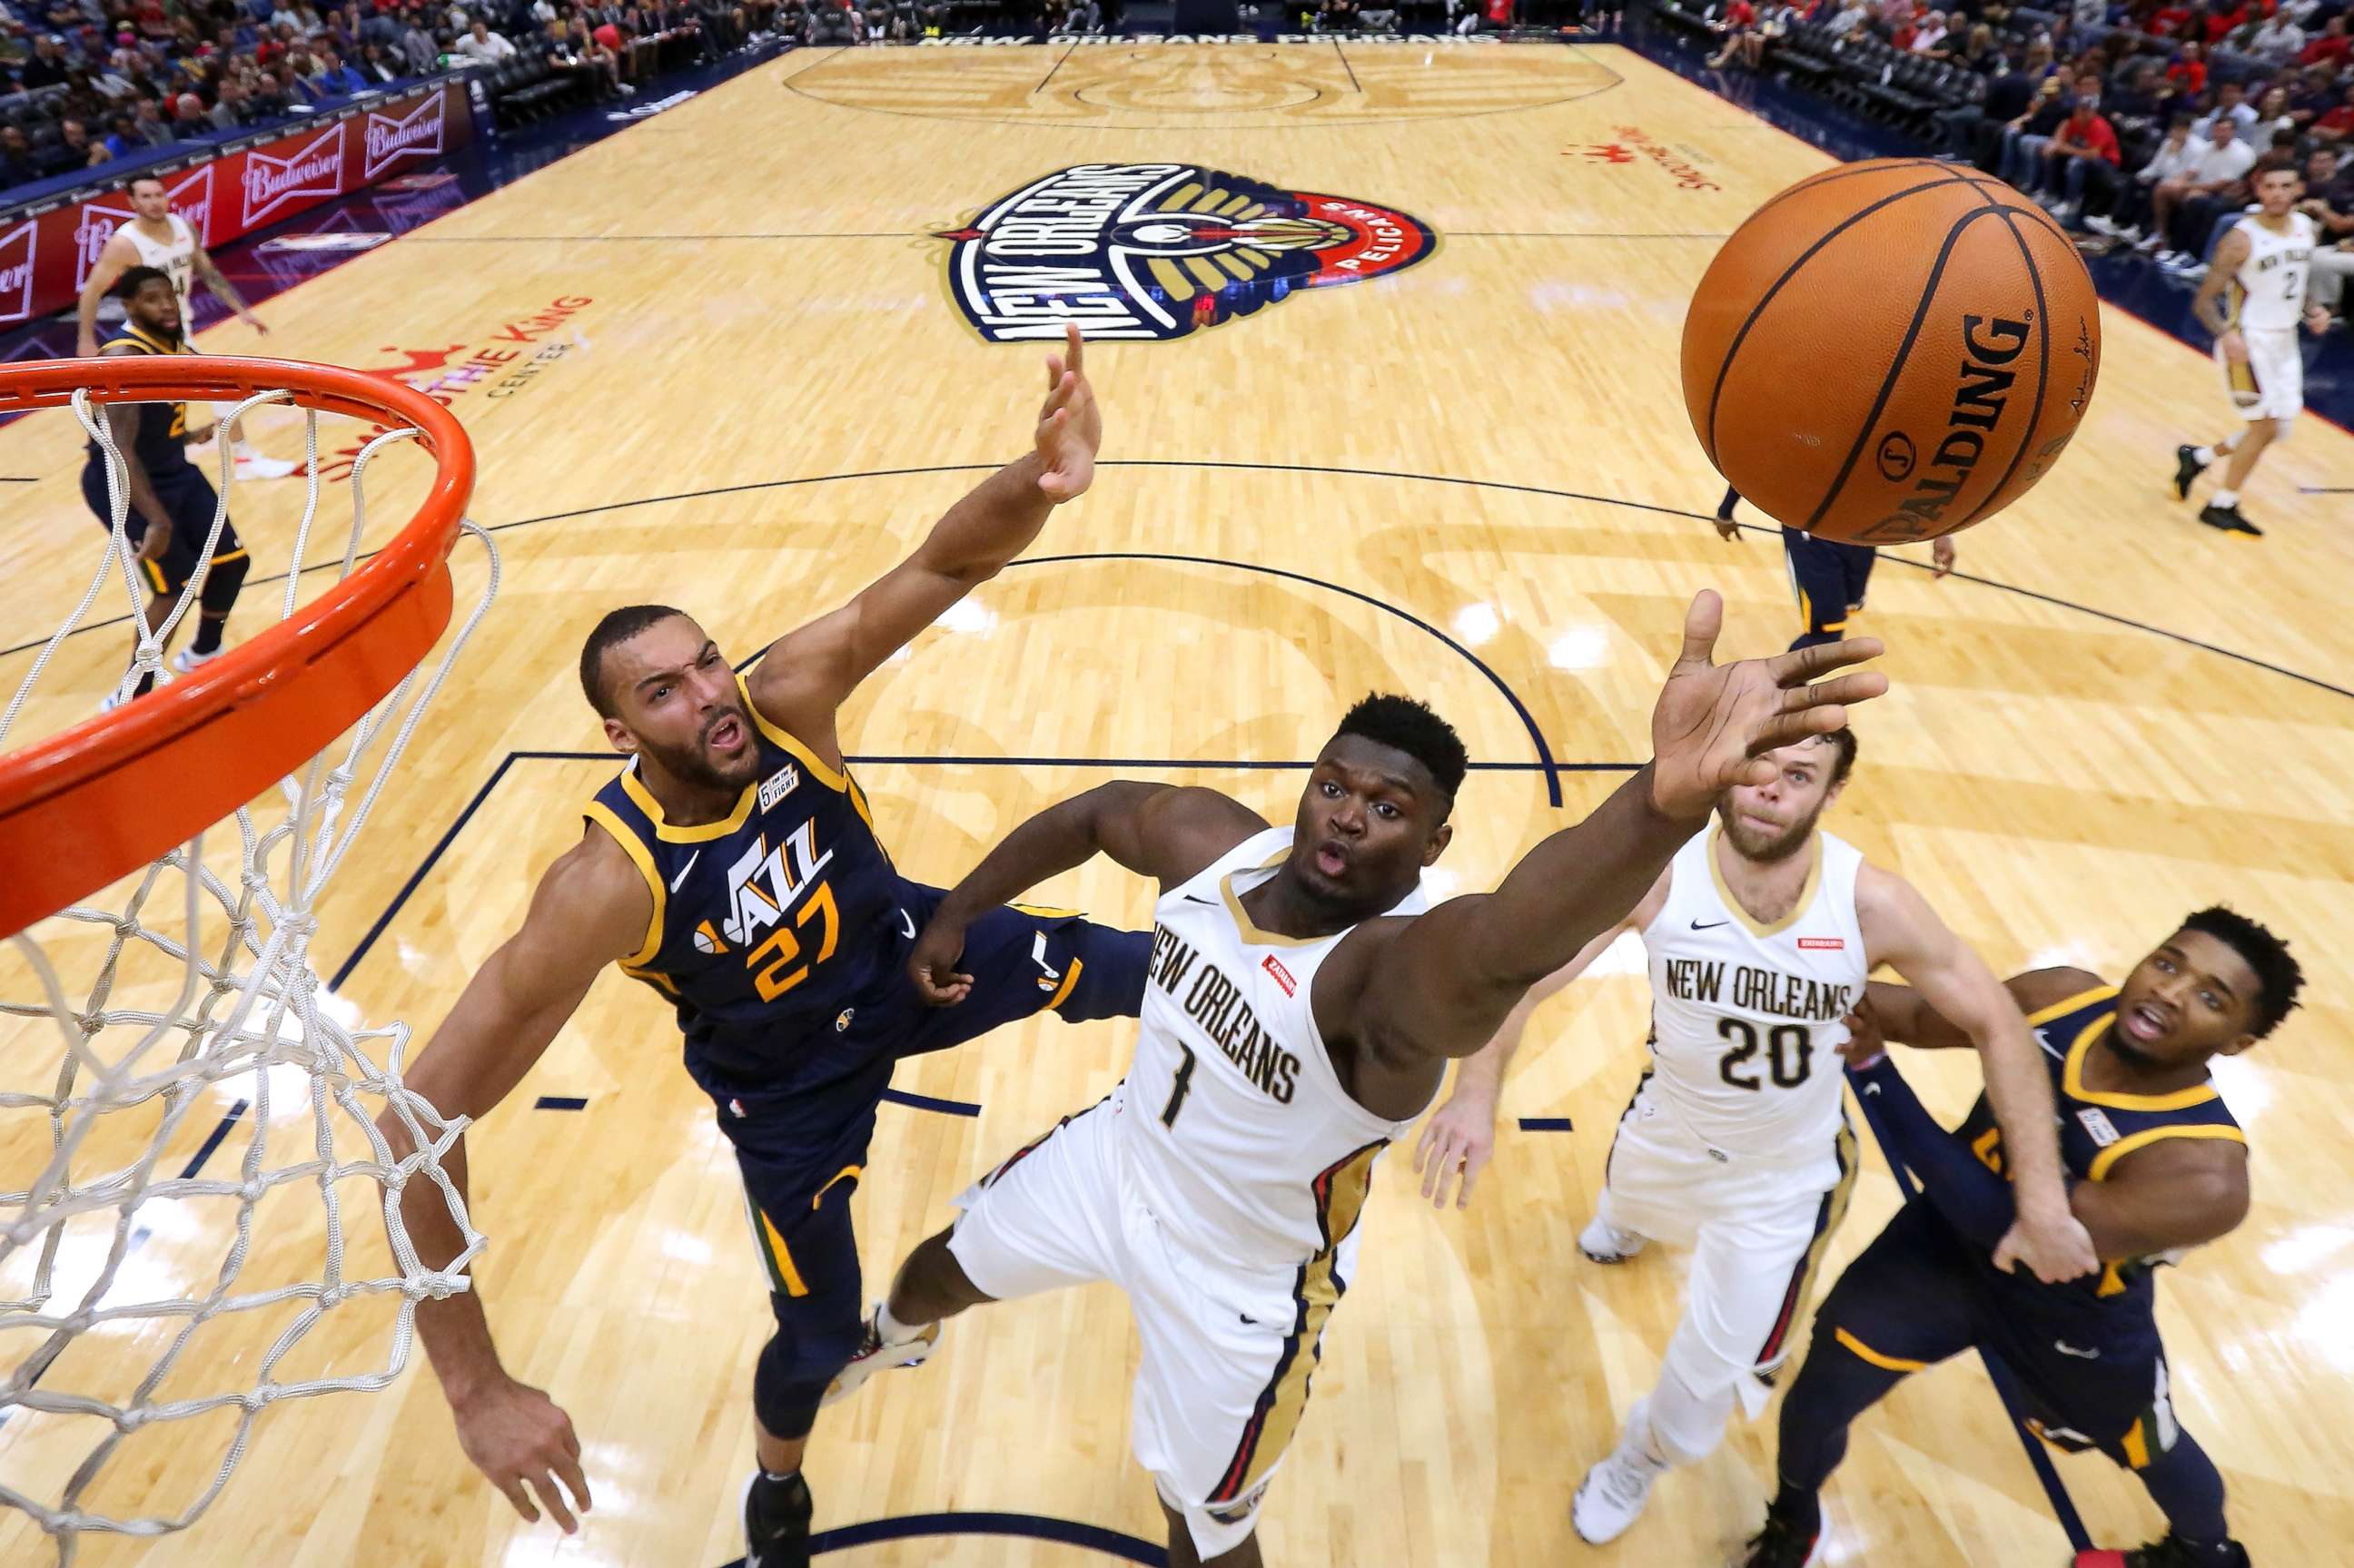 PHOTO: Zion Williamson #1 of the New Orleans Pelicans shoots against Rudy Gobert #27 of the Utah Jazz during the second half of a game at the Smoothie King Center on October 11, 2019 in New Orleans, Louisiana.